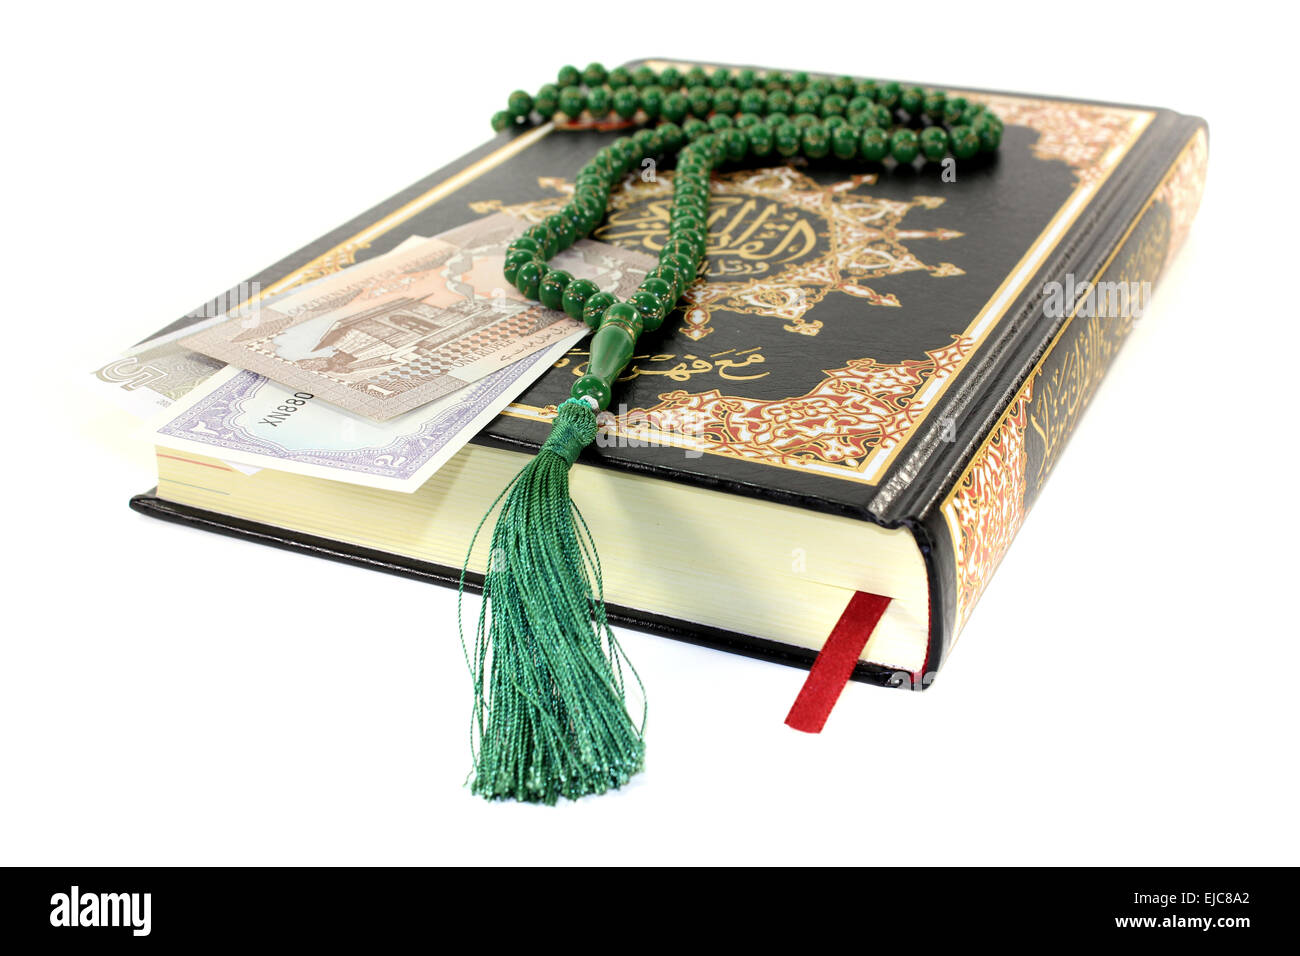 slammed Quran with Pakistani currency Stock Photo